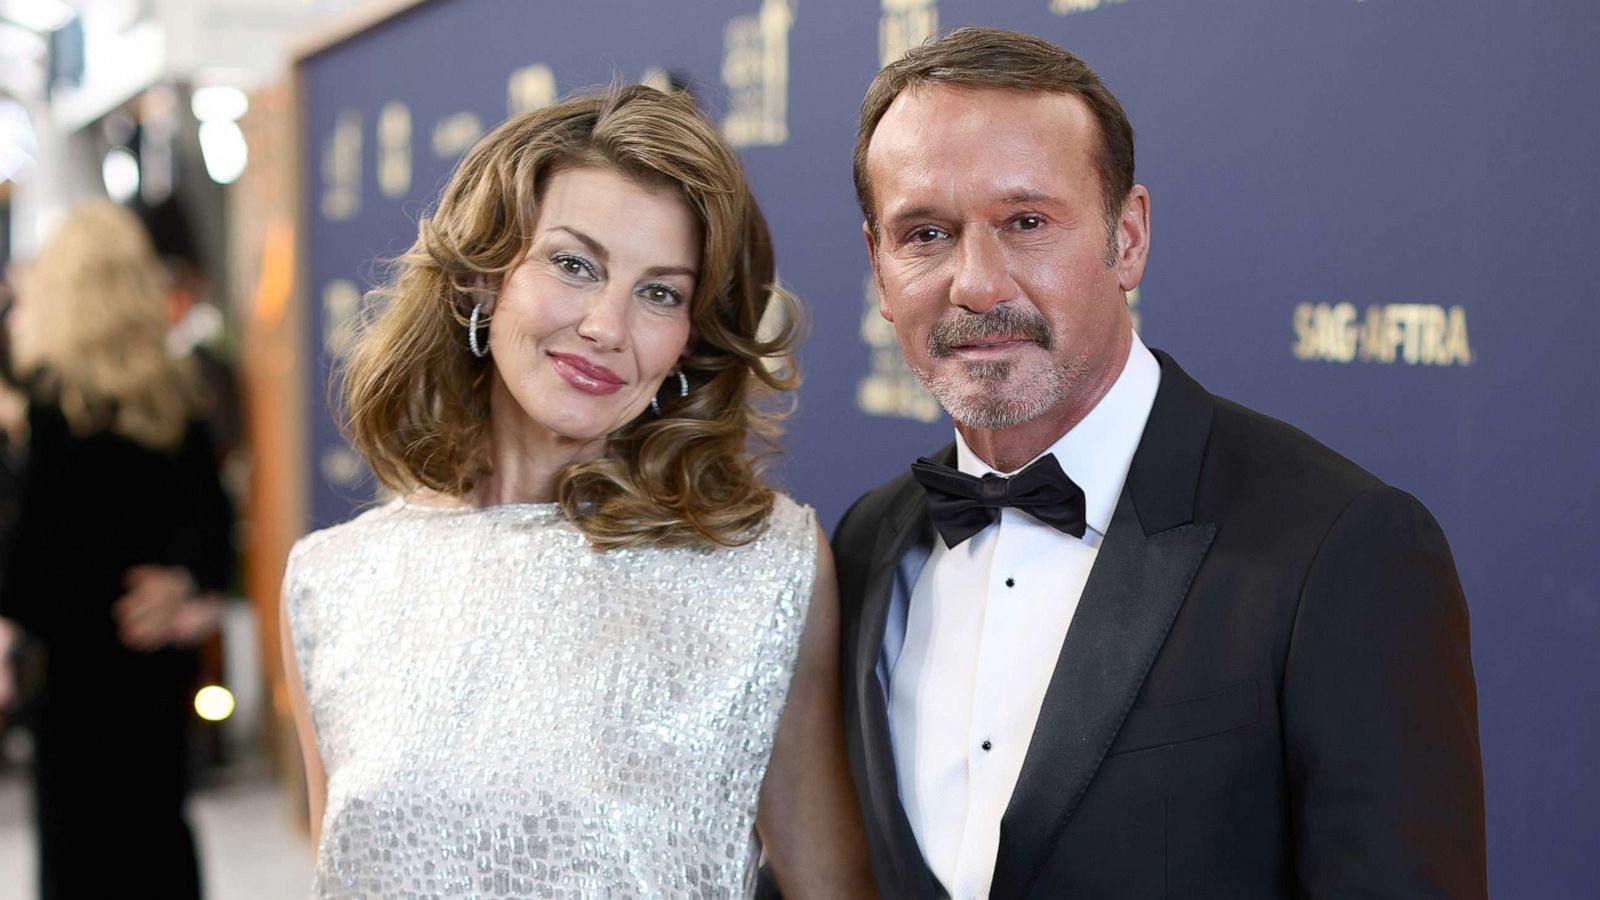 Tim McGraw makes shock behind-the-scenes reveal about Faith Hill and 1883